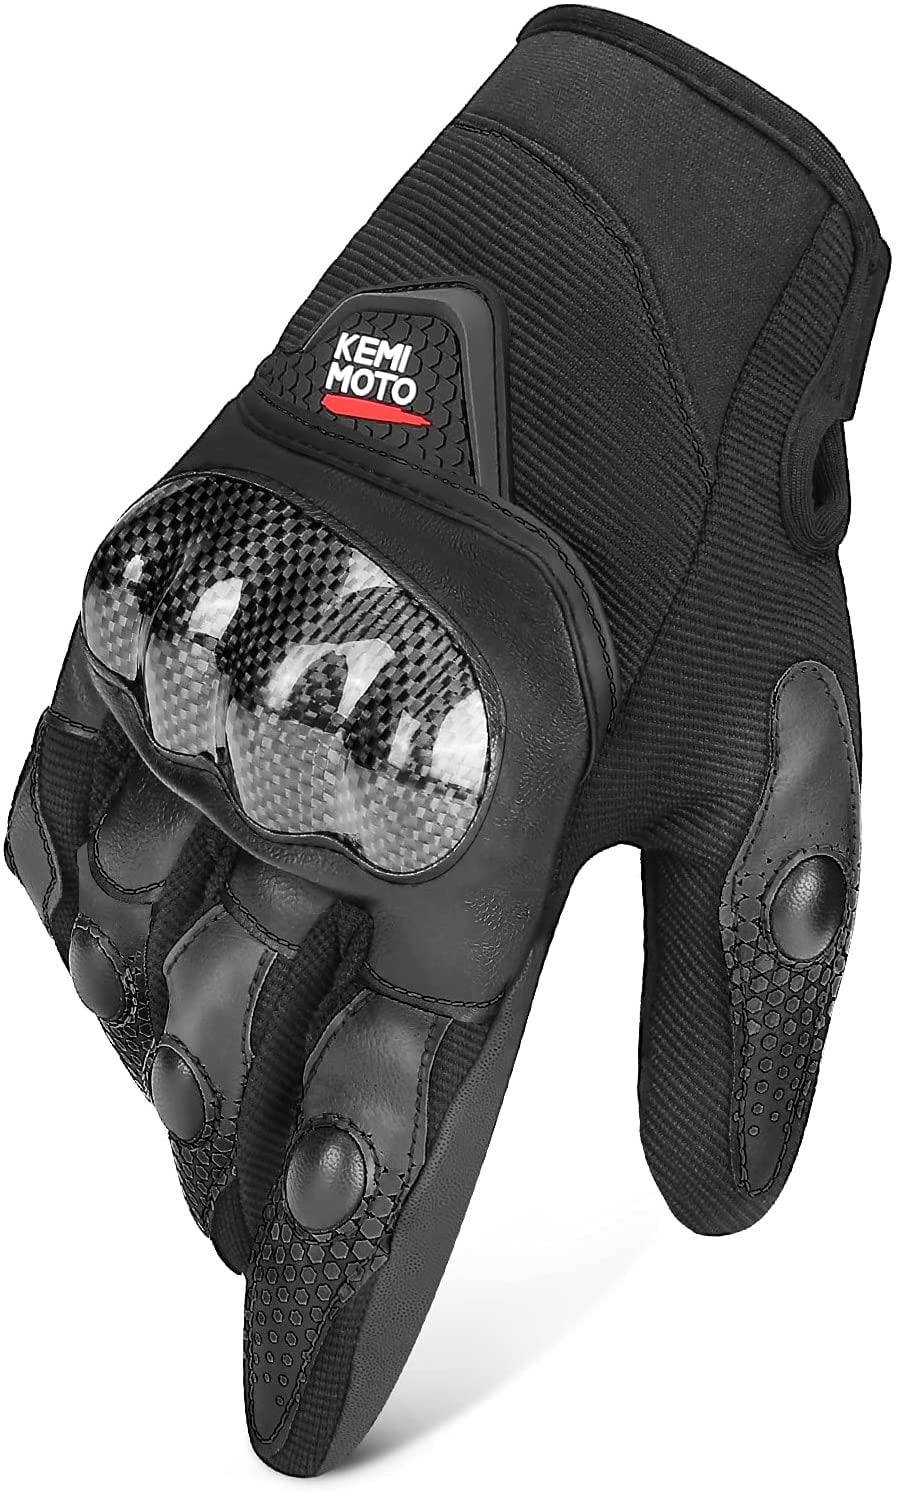 Riding Hiking Climbing Motorcycle Gloves for Men Full Finger Hard Knuckle Motorcycle Gloves with Non-Slip Palm Touch Screen Design for Racing Cycling 